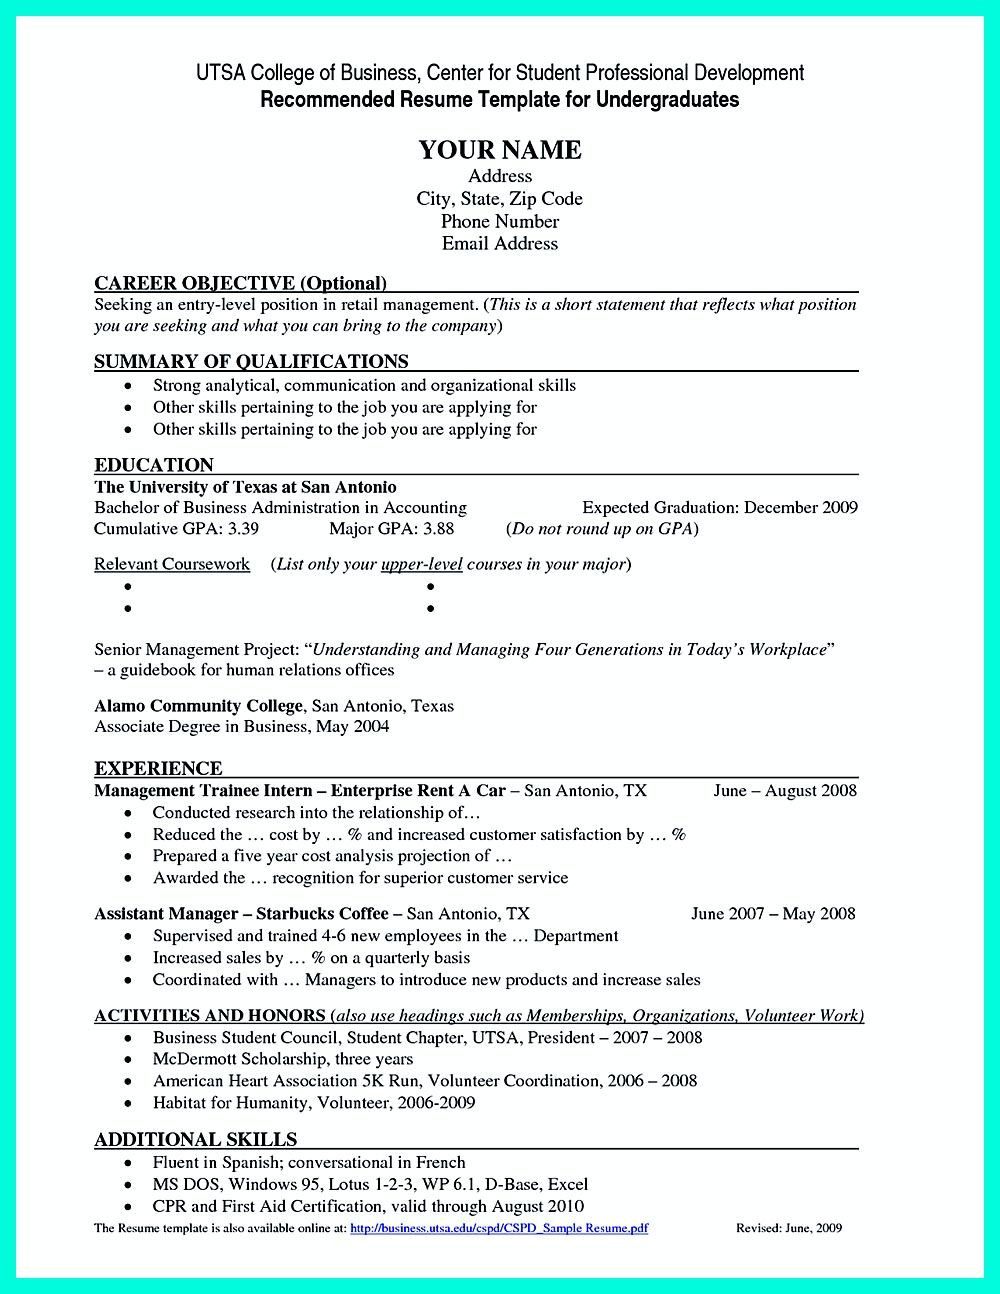 Sample Resume for Fresh Accounting Graduate without Experience Best Current College Student Resume with No Experience Job …